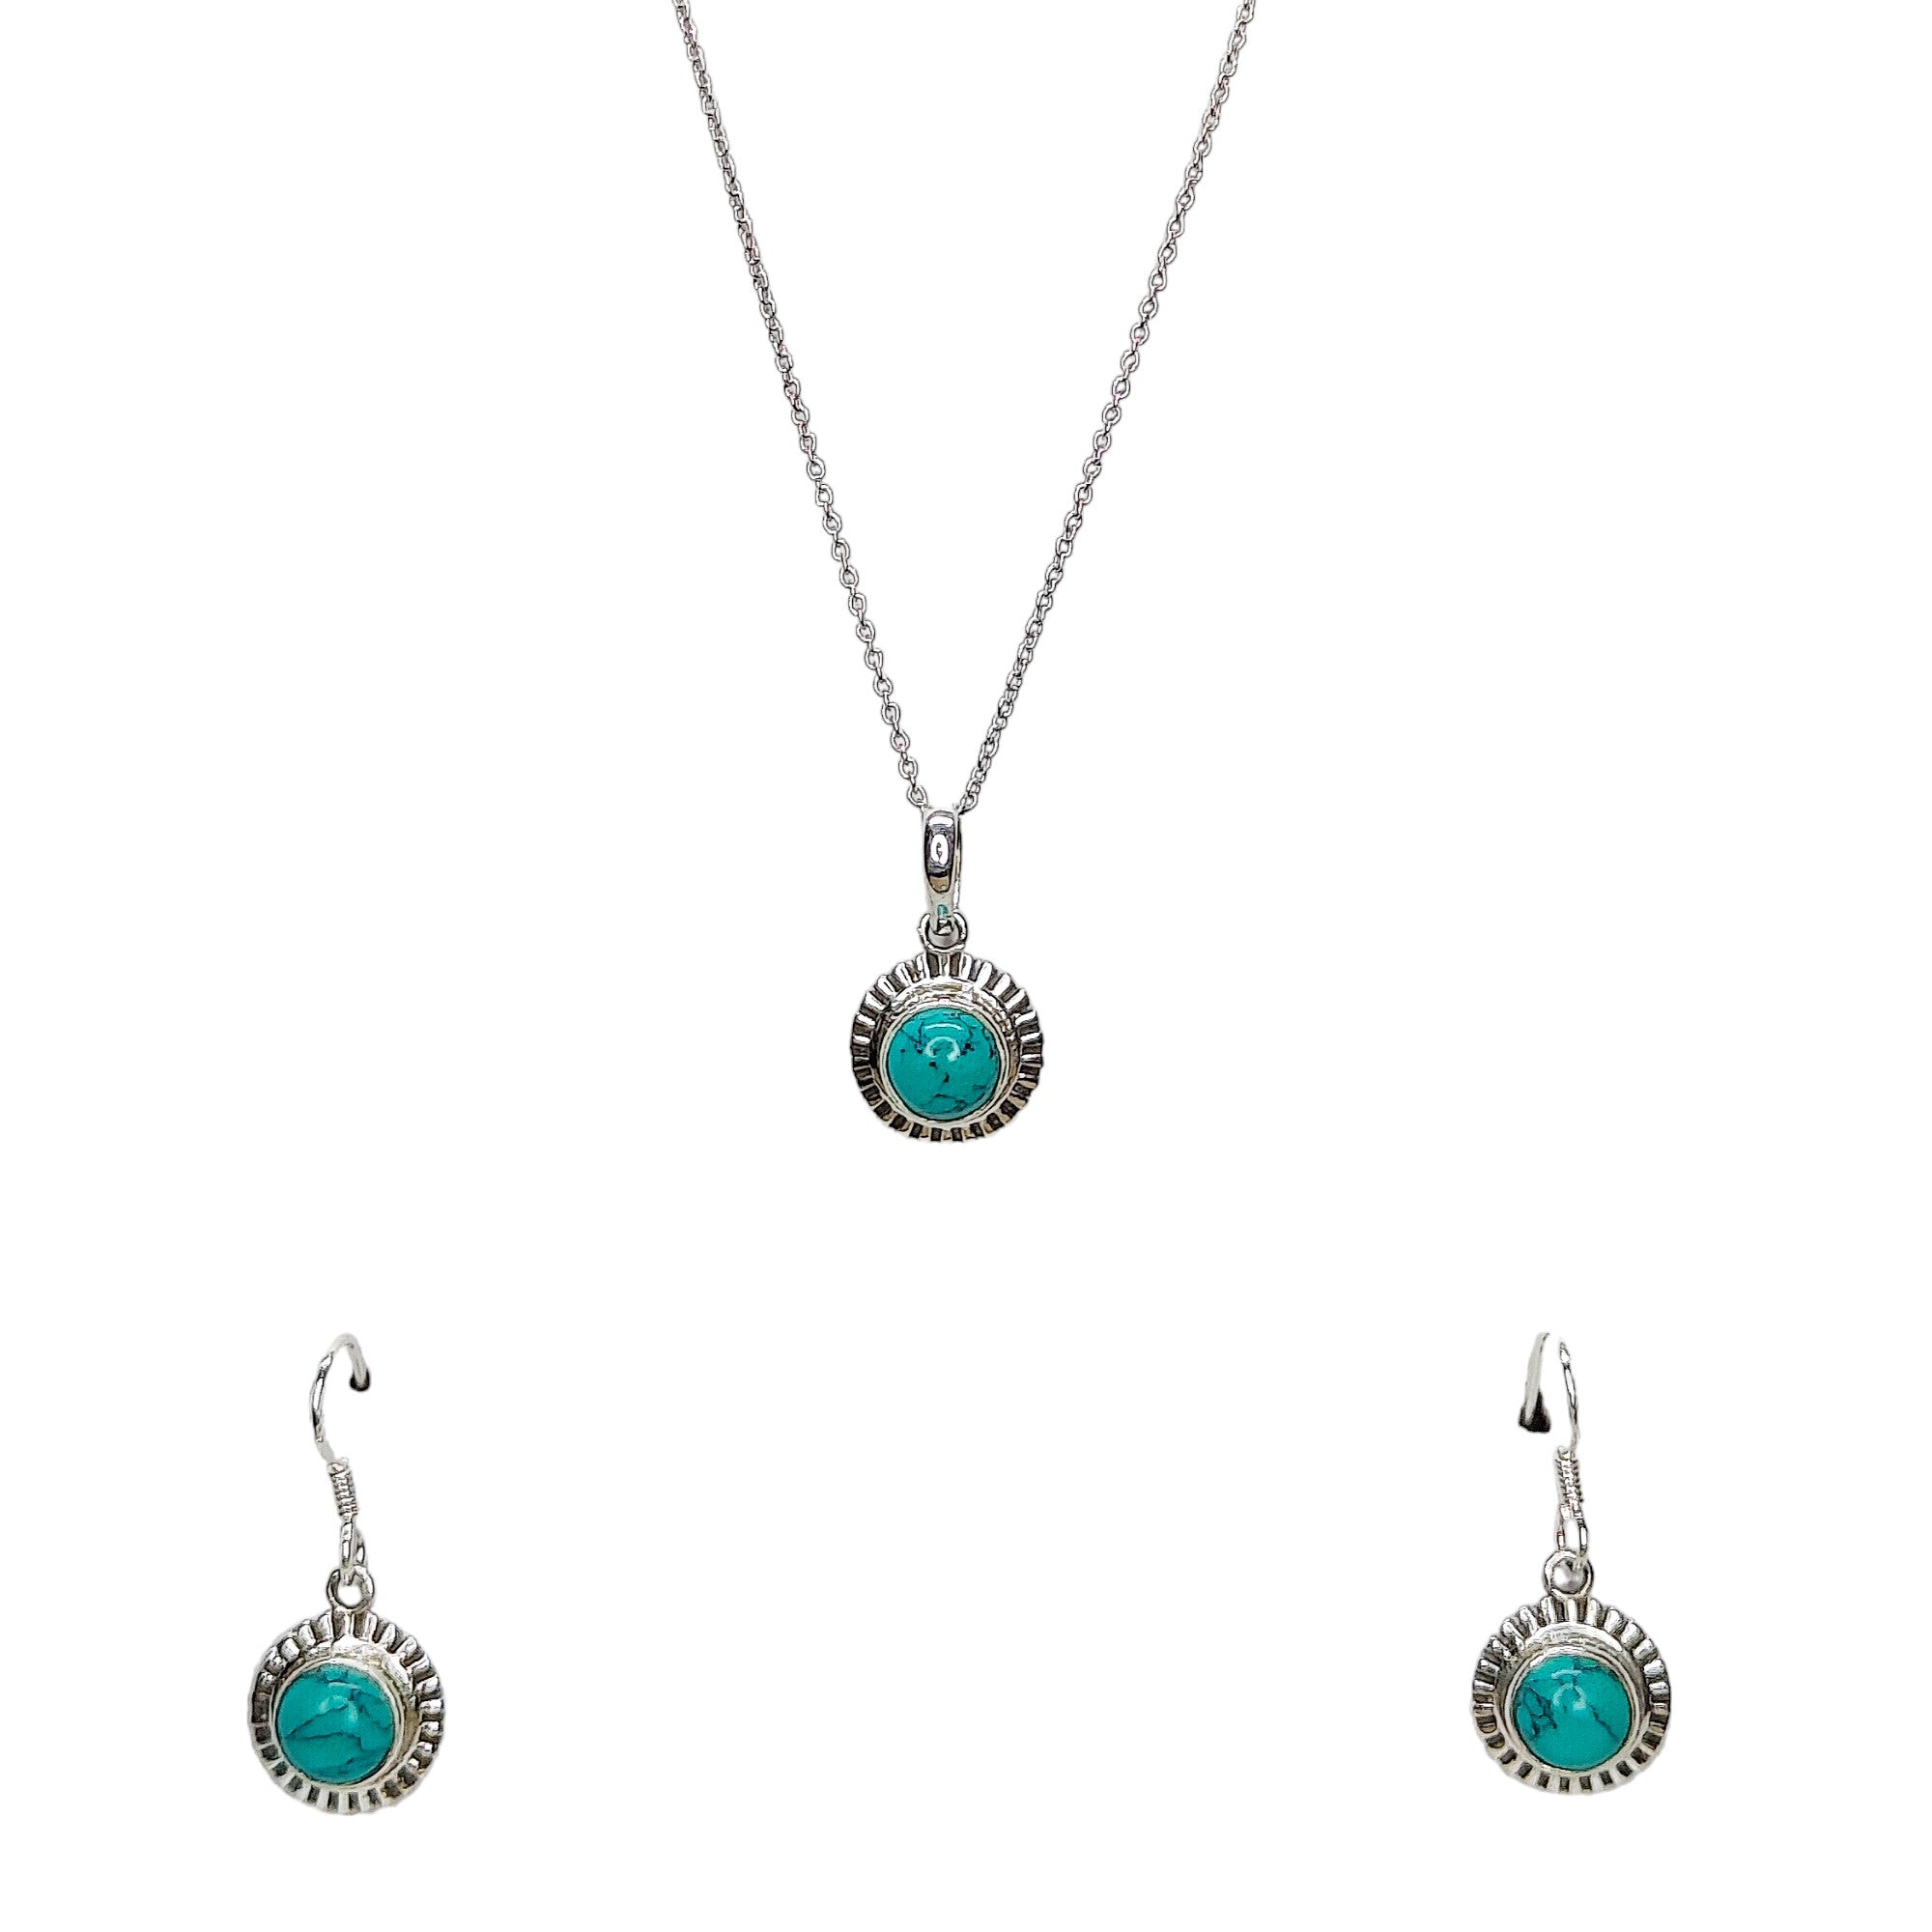 Blue Stone Sunflower Pendent Sterling Silver Pendant Set with Chain for Women - Rivansh